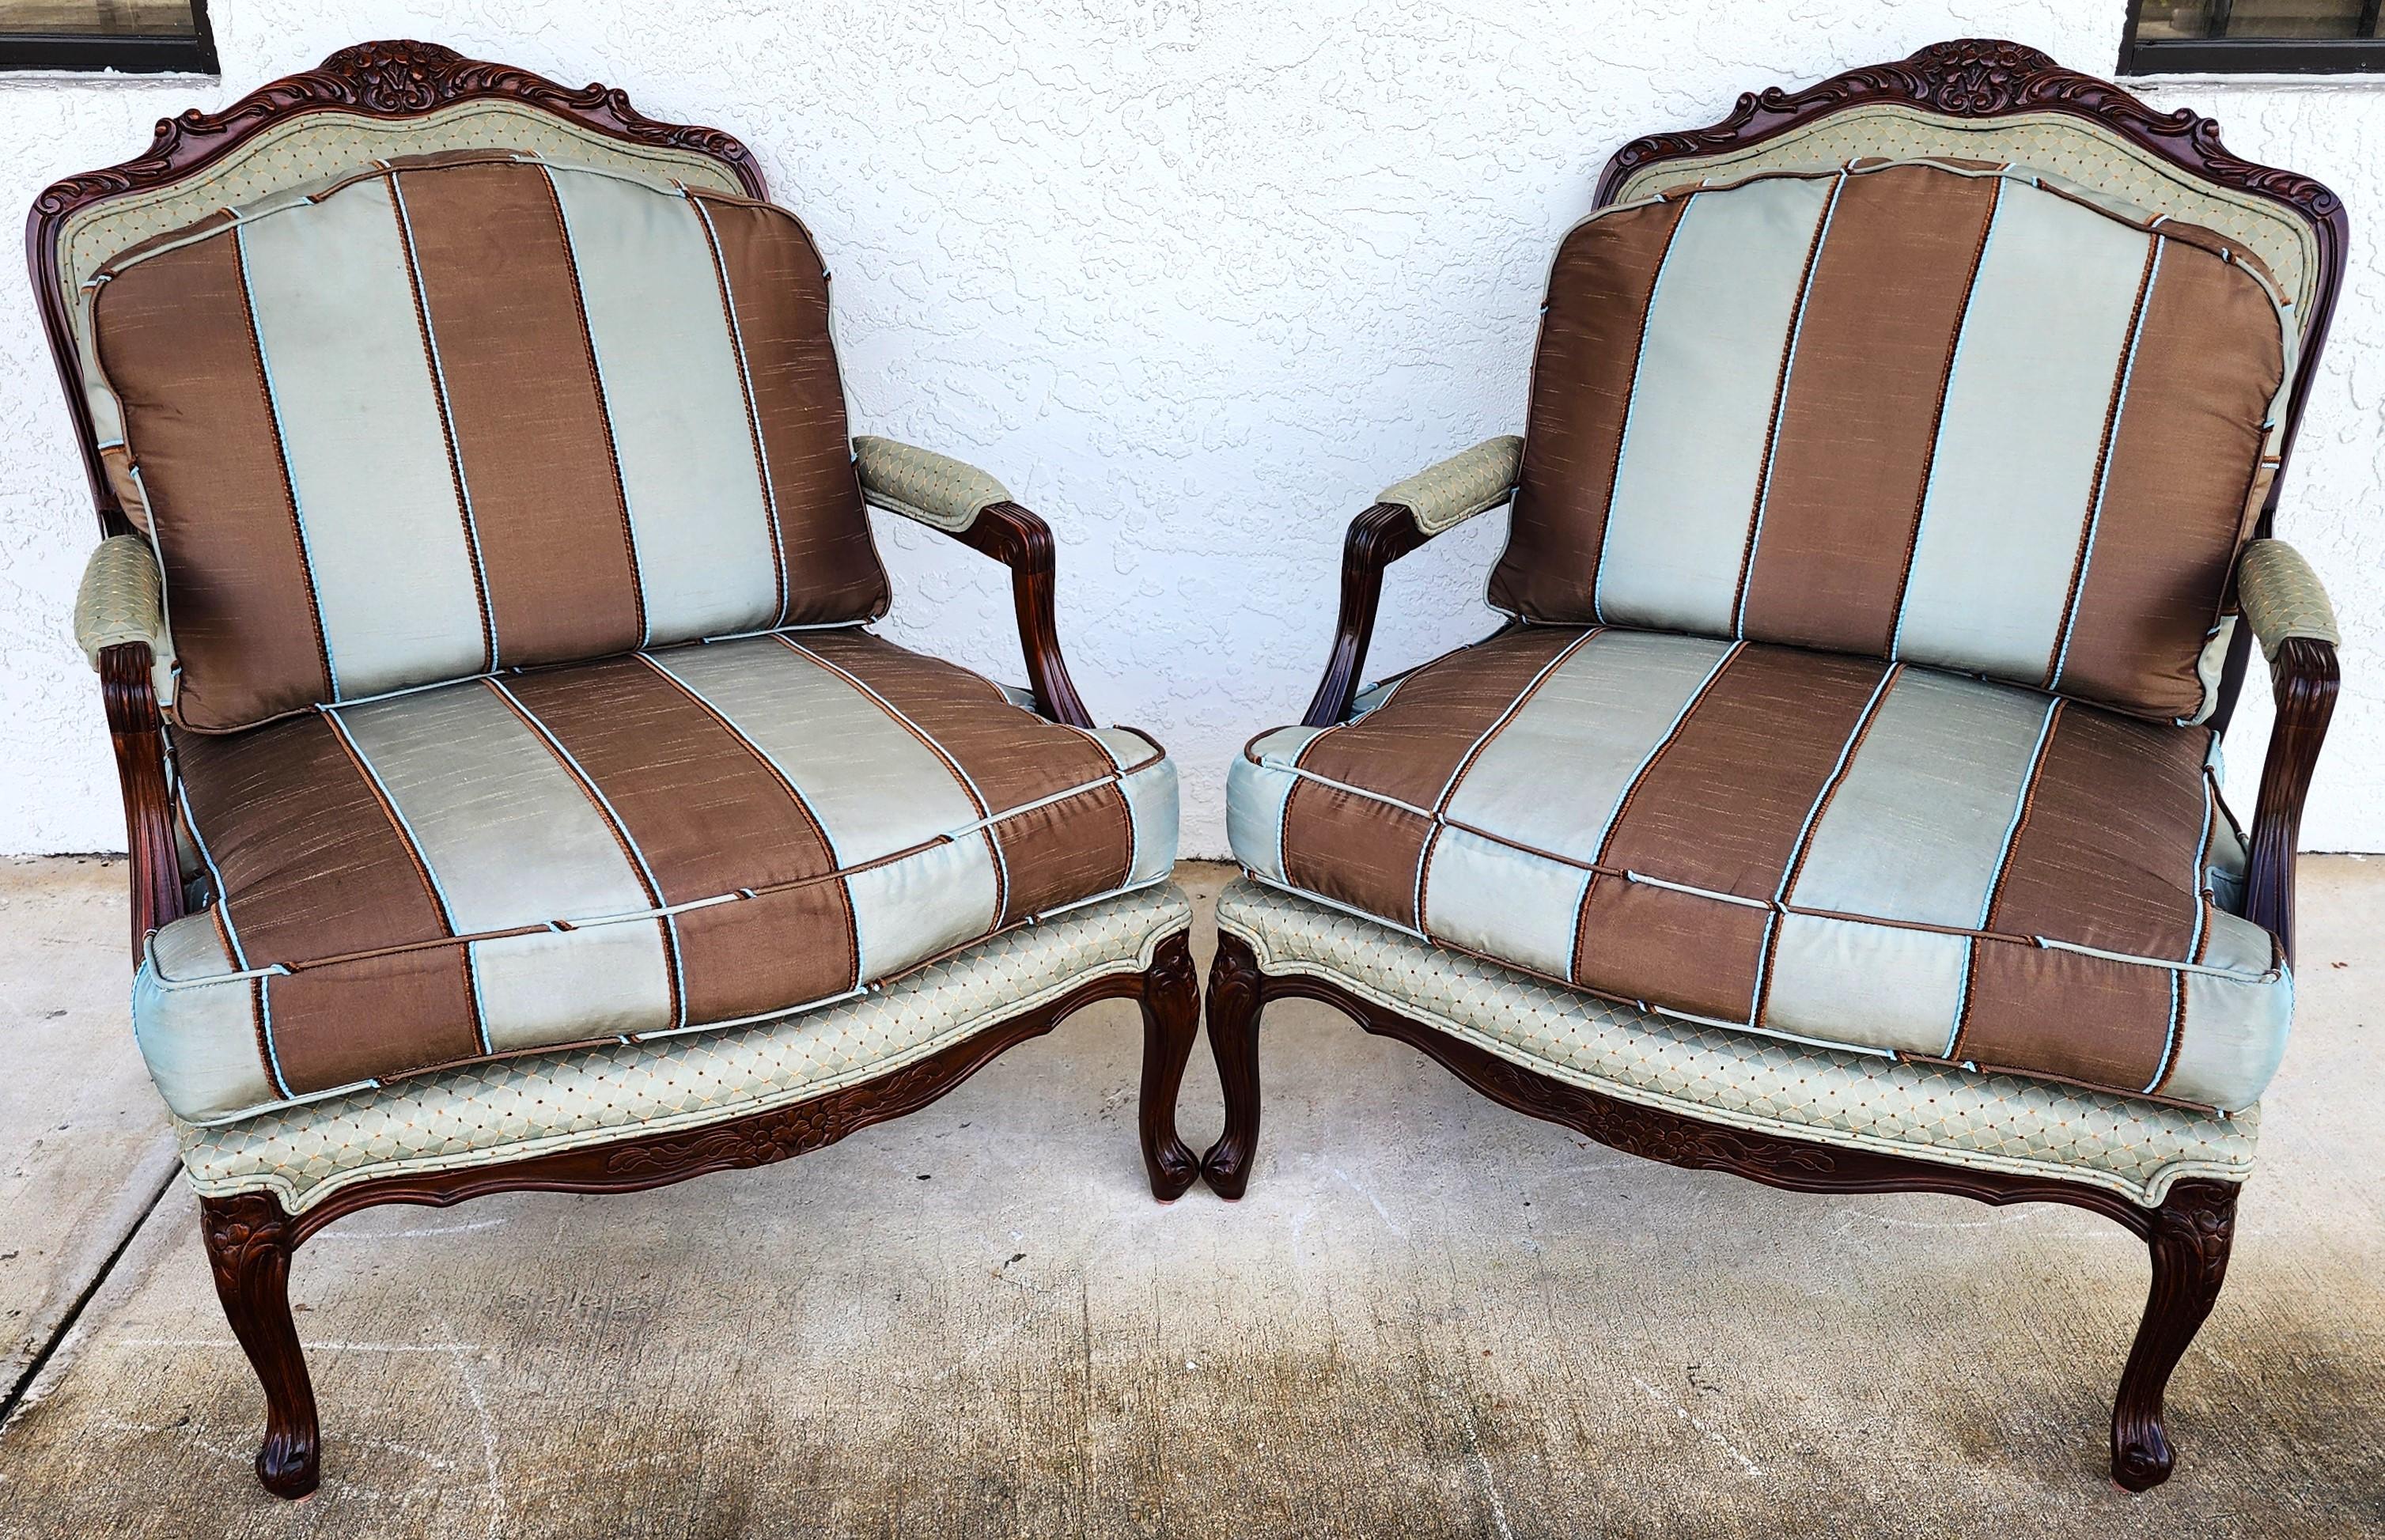 For FULL item description click on CONTINUE READING at the bottom of this page.

Offering One Of Our Recent Palm Beach Estate Fine Furniture Acquisitions Of A
Pair of Vintage French Louis XV Style Lounge Chairs 
Zippered cushions are silk. The rest